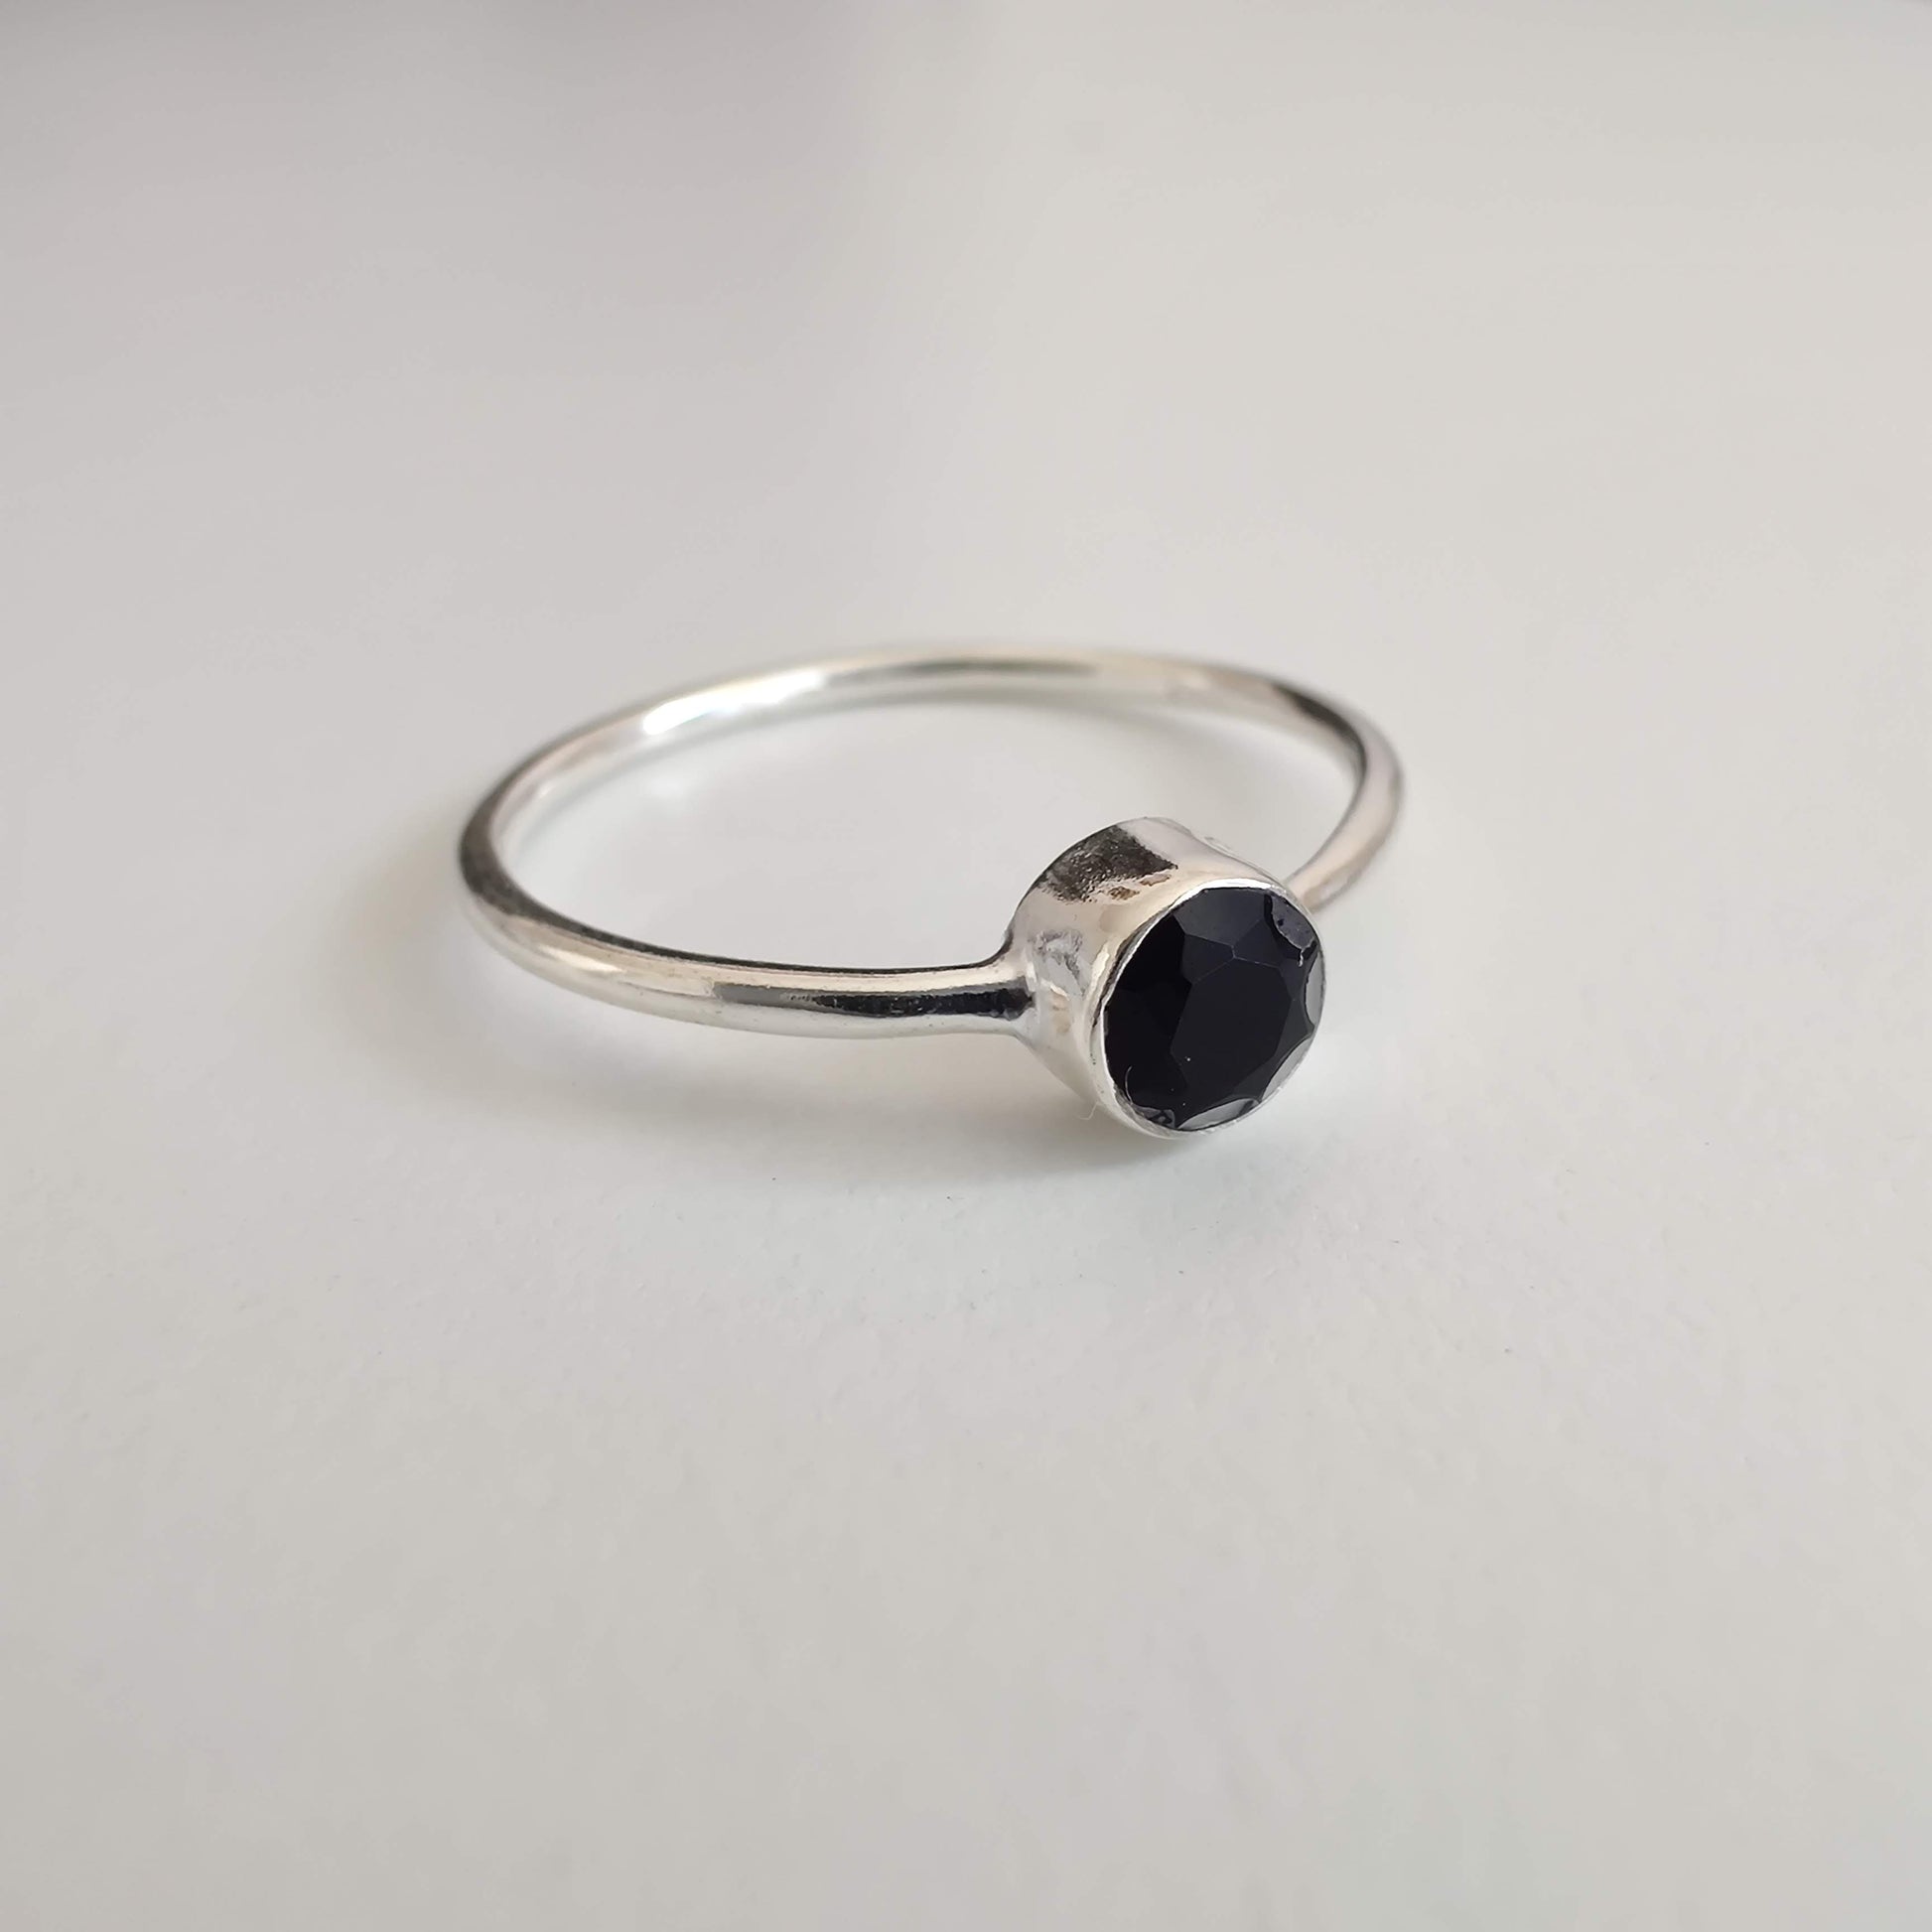 Black Onyx Delicate 925 Sterling Silver Ring - Rivendell Shop